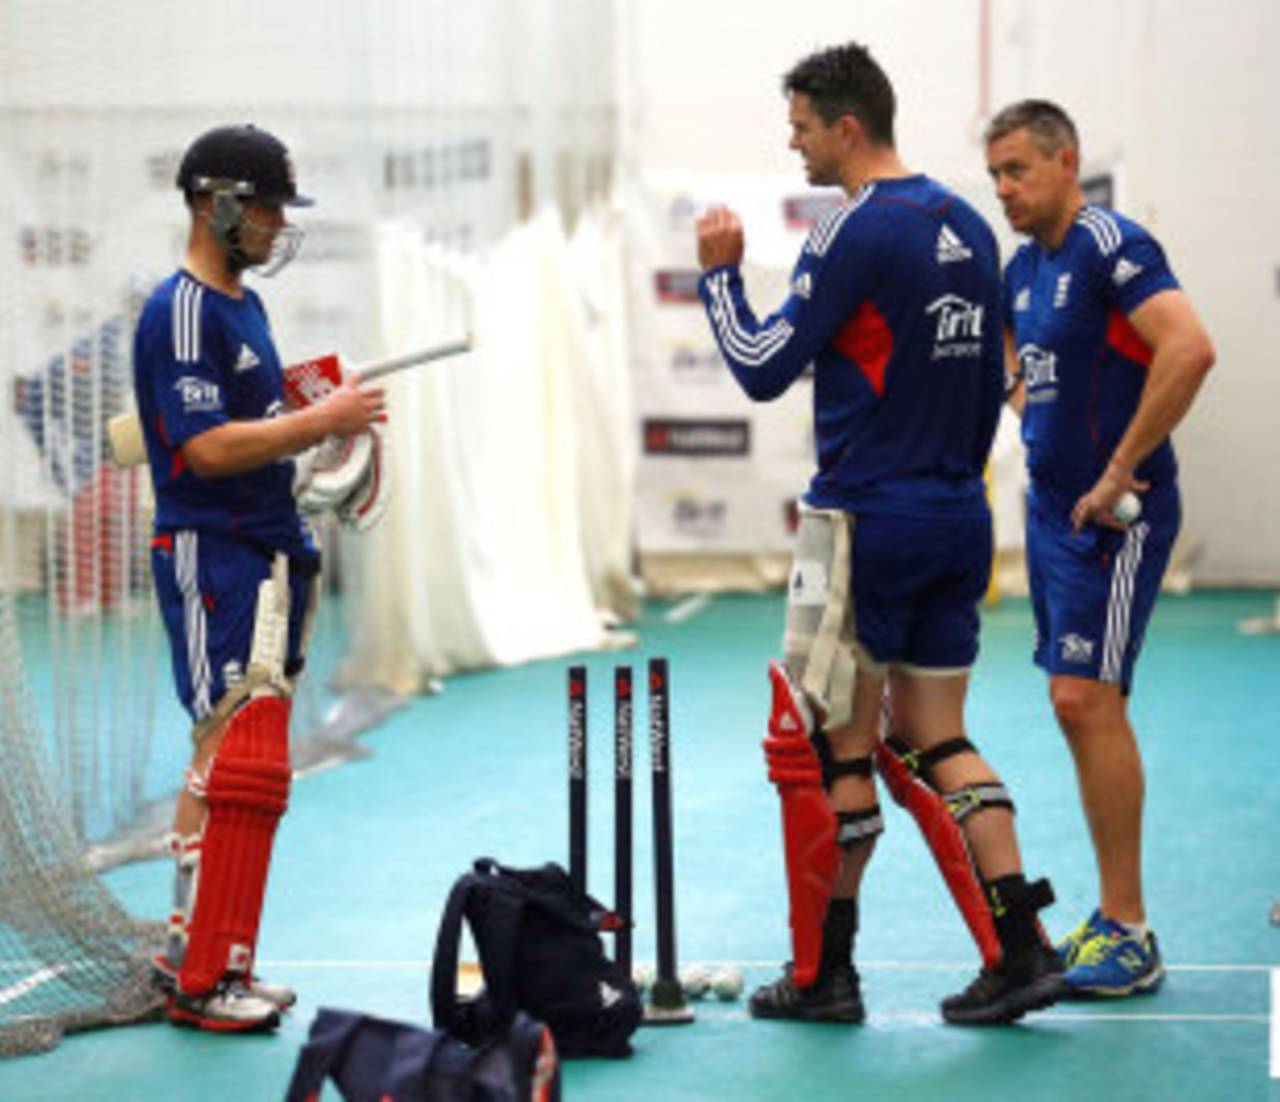 Kevin Pietersen and Eoin Morgan discuss their batting with Ashley Giles, Cardiff, September, 13, 2013